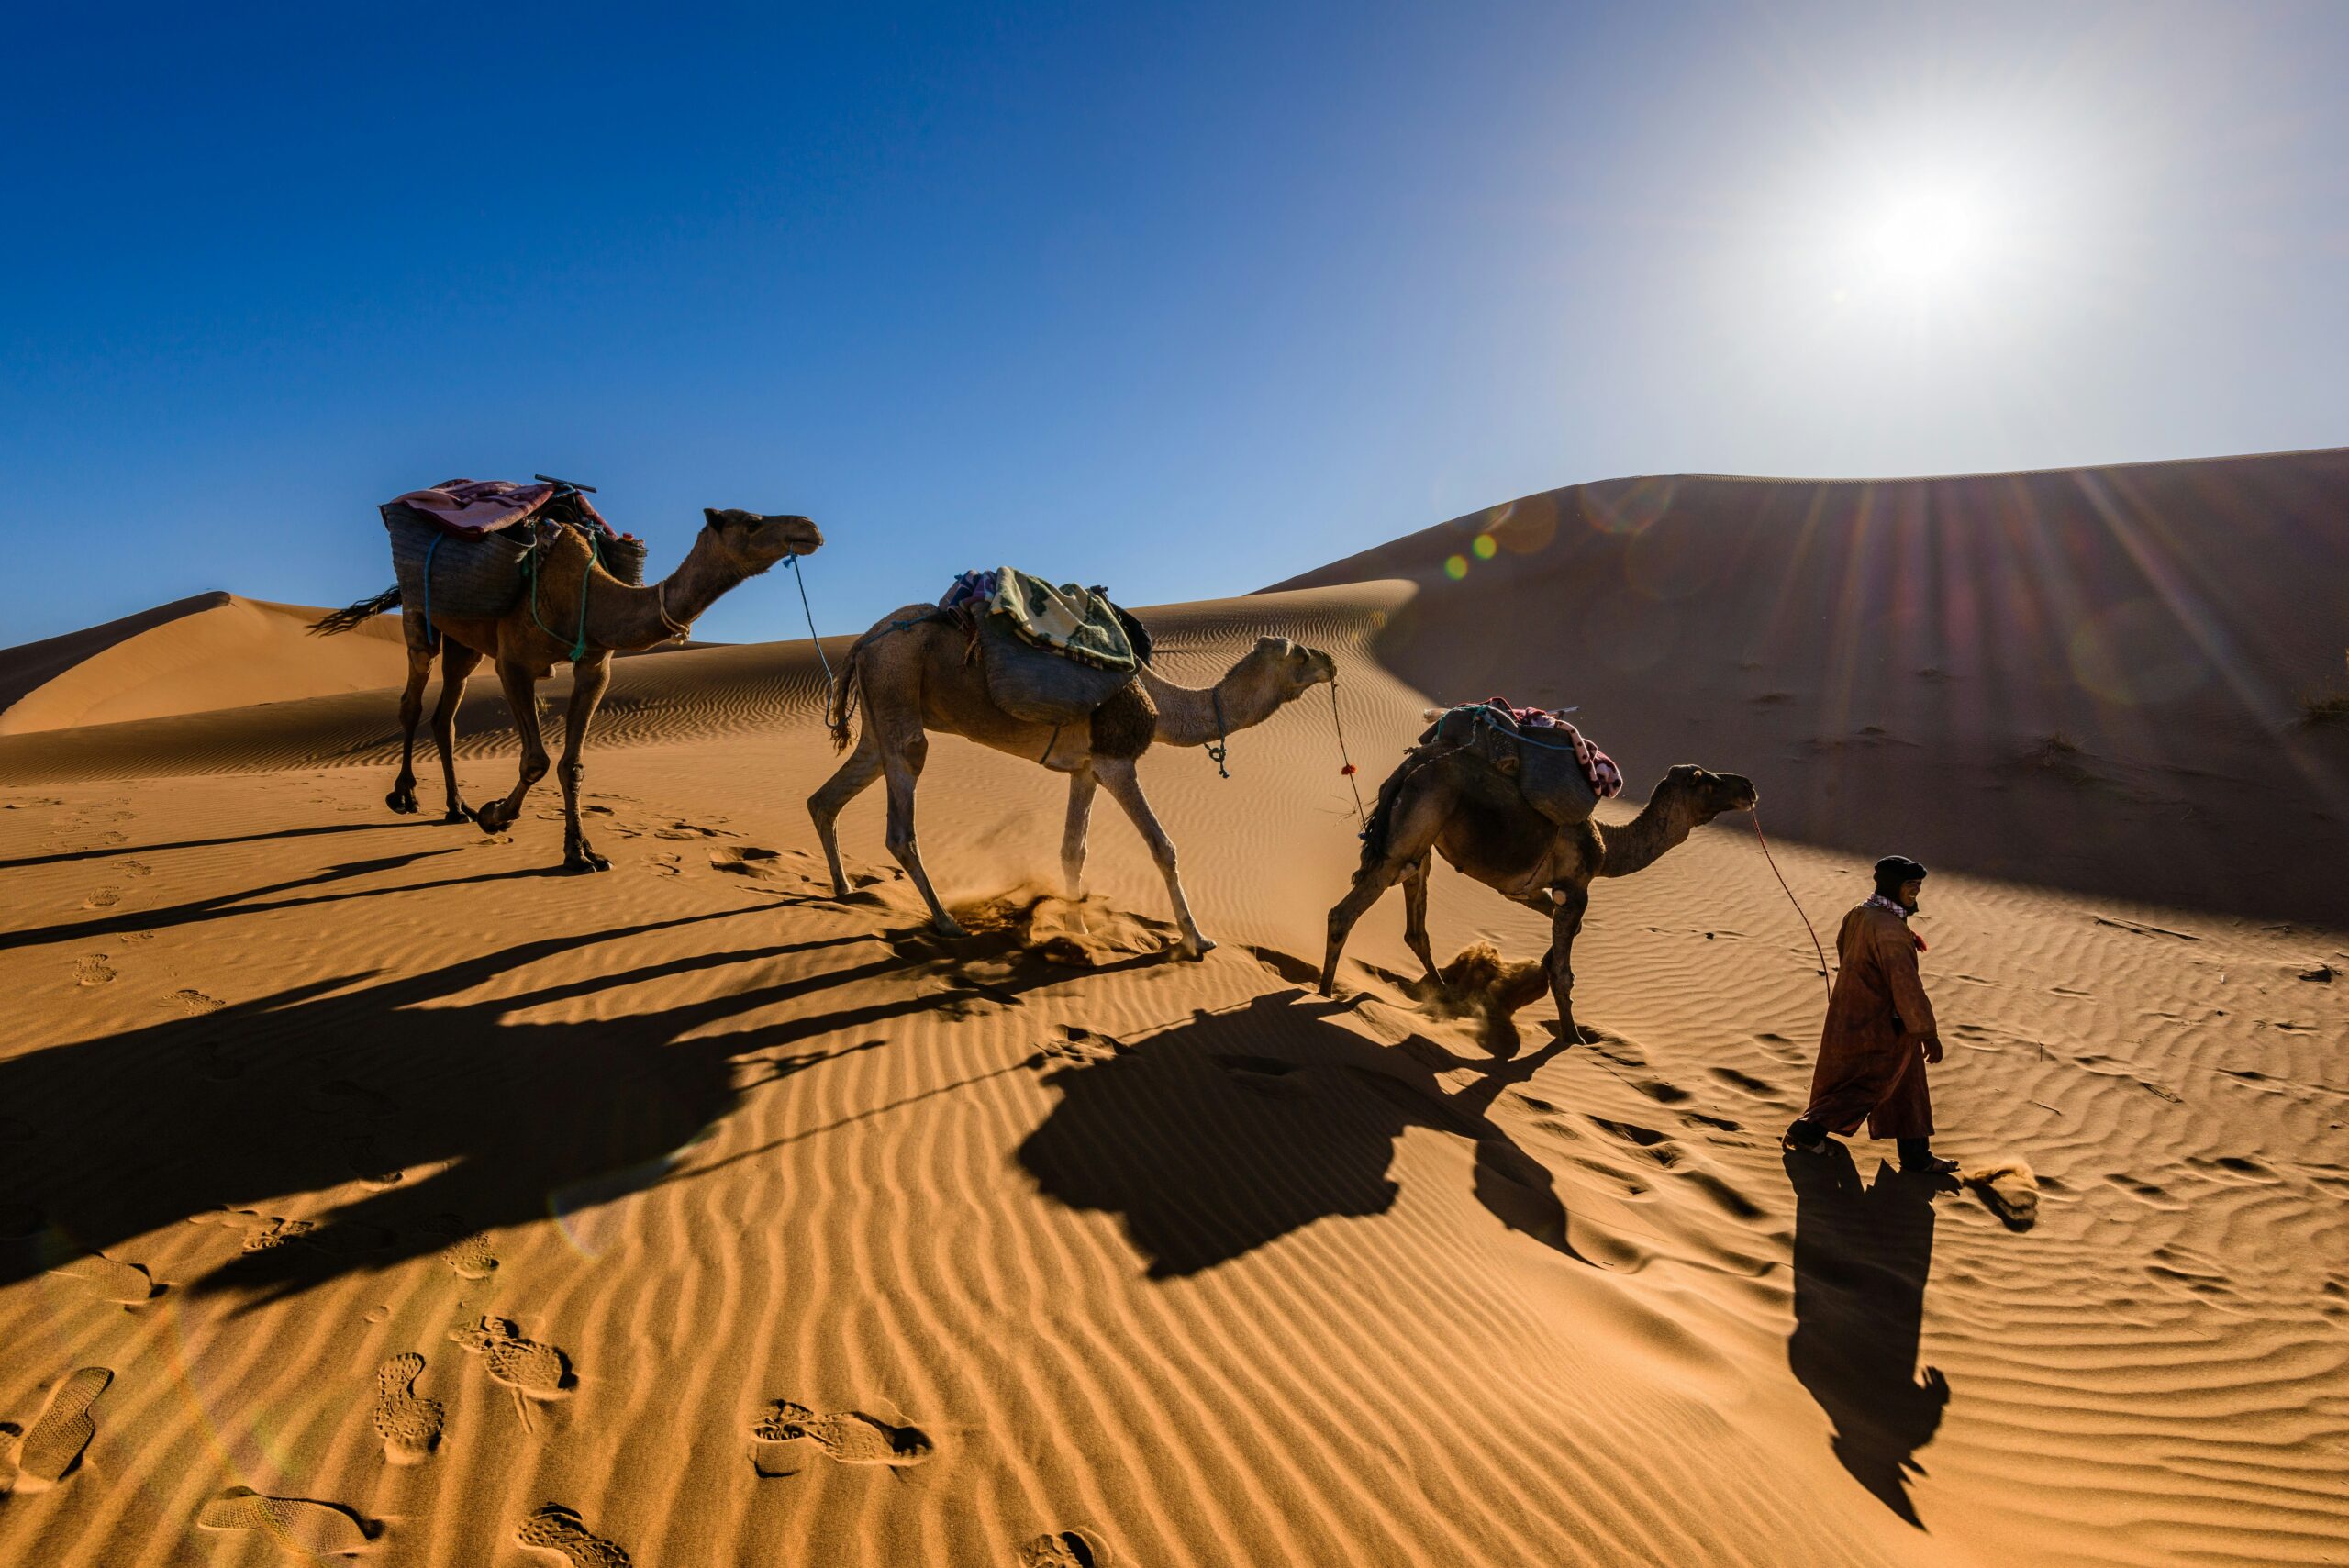 These travel advisories are the top resources for tourists looking to learn more about the safety in Morocco.
pictured: a man and three camels journeying through the Sahara Desert on a sunny day 